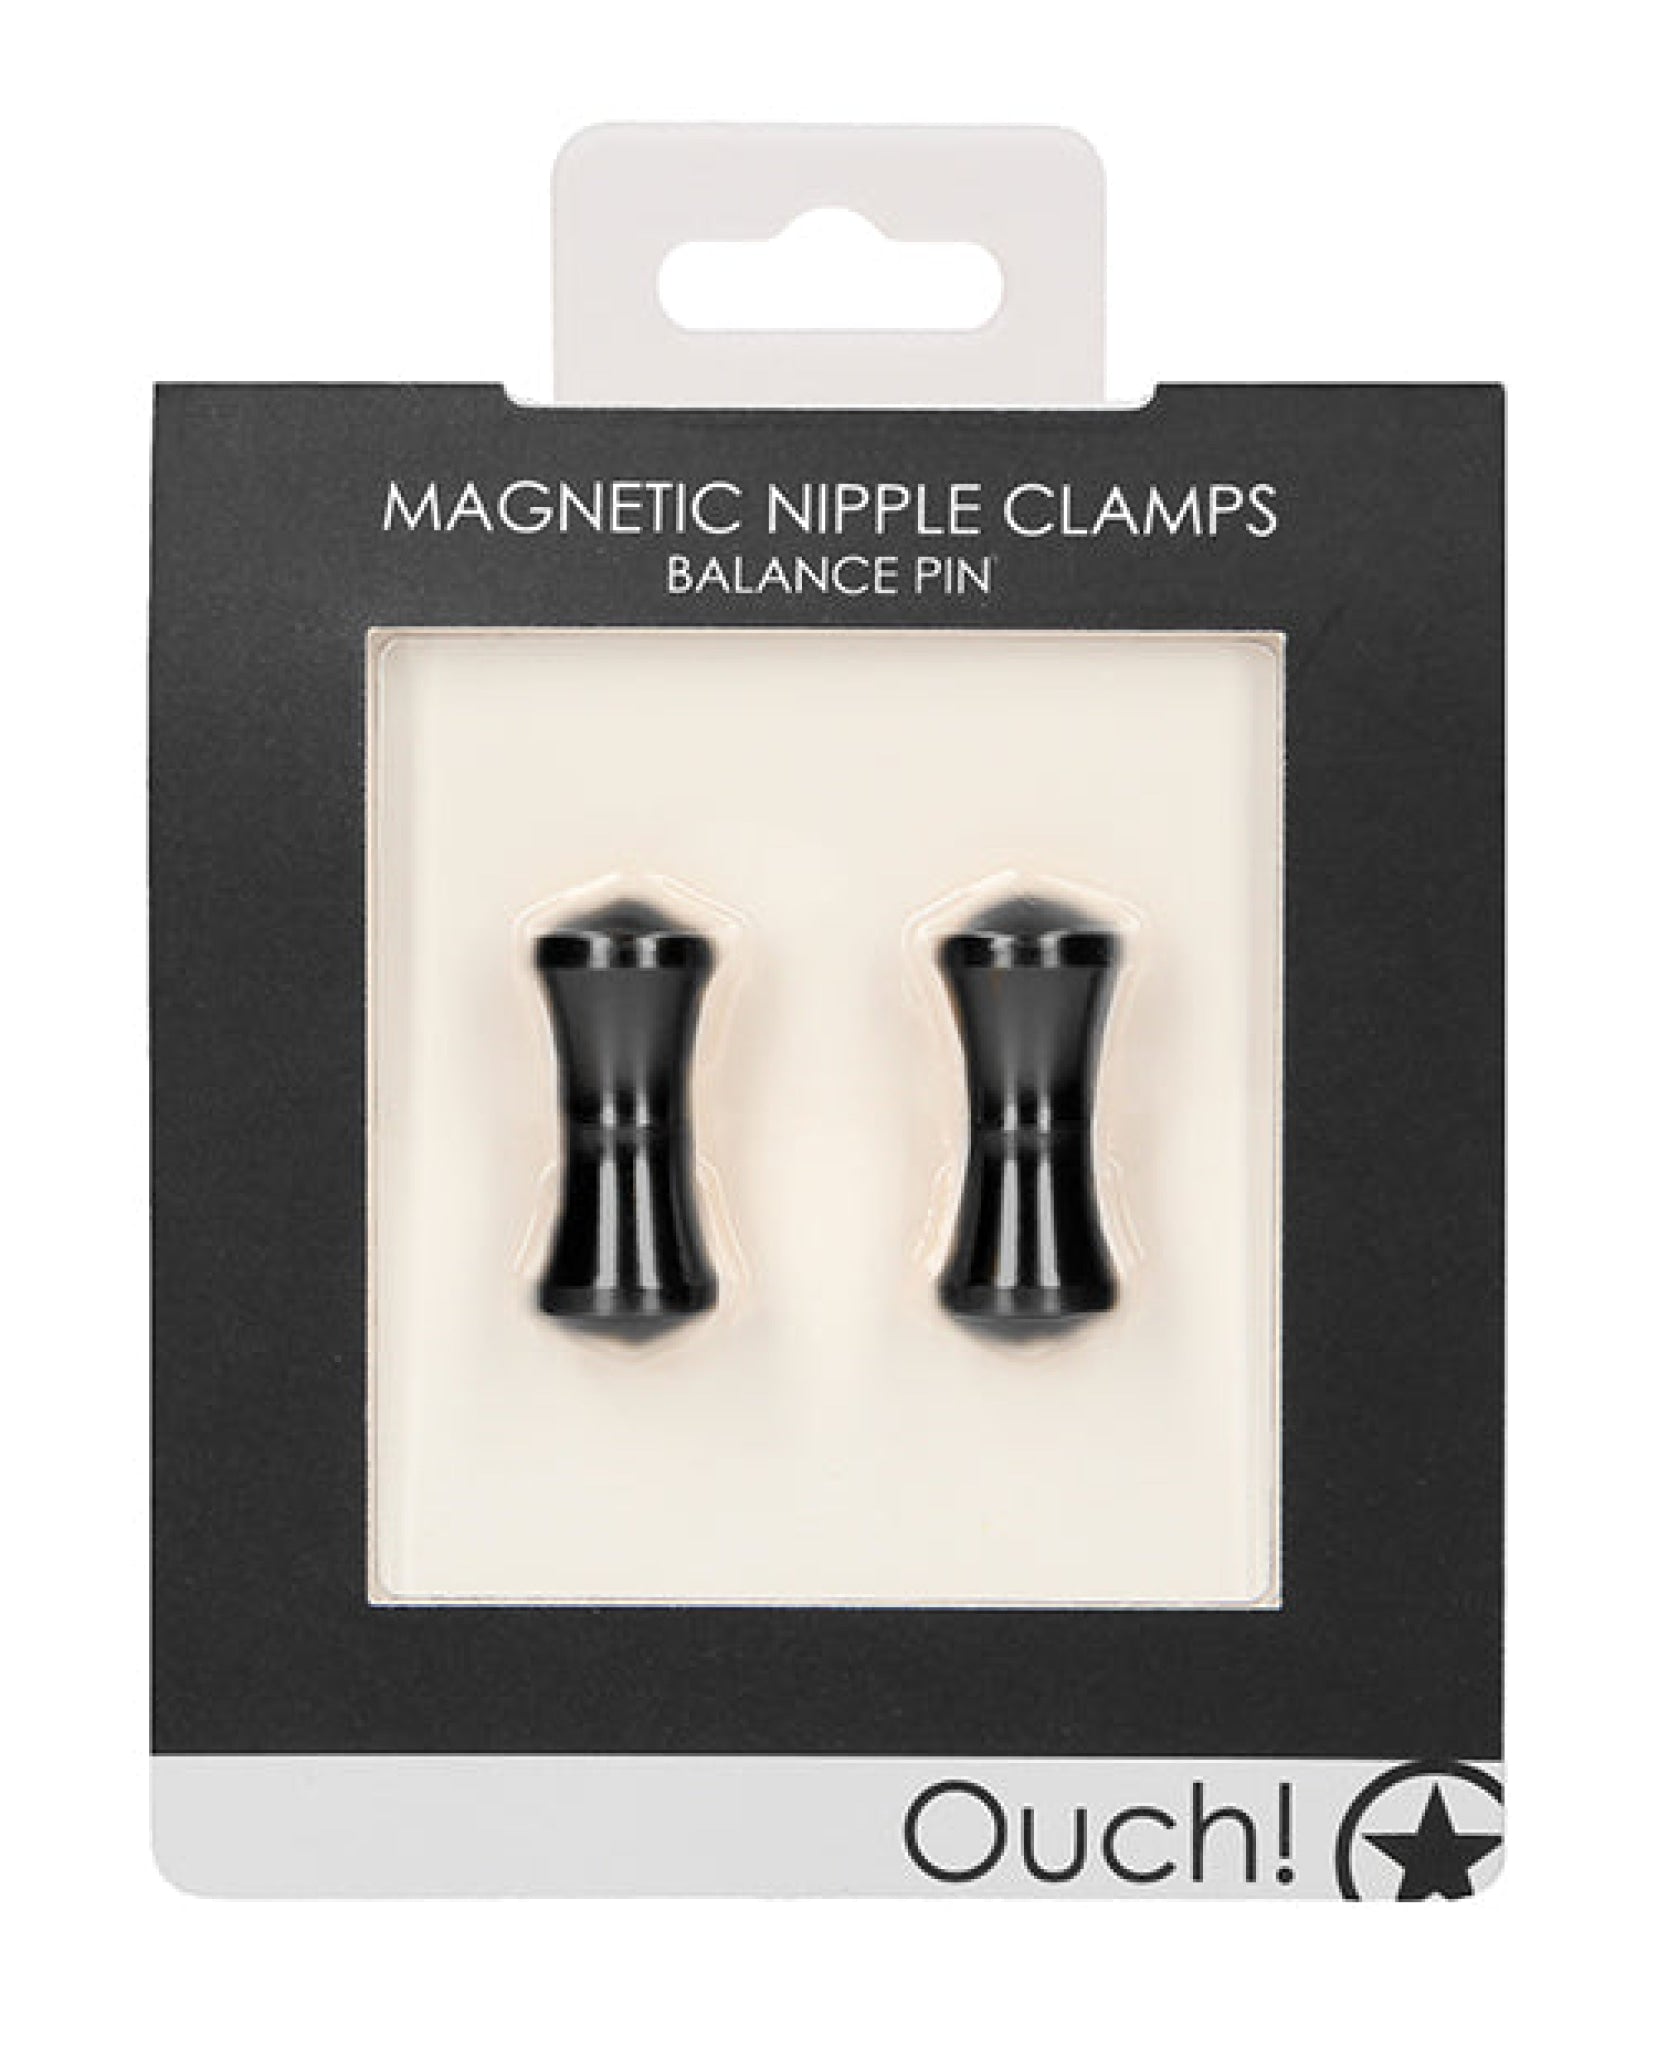 Shots Ouch Balance Pin Magnetic Nipple Clamps Shots